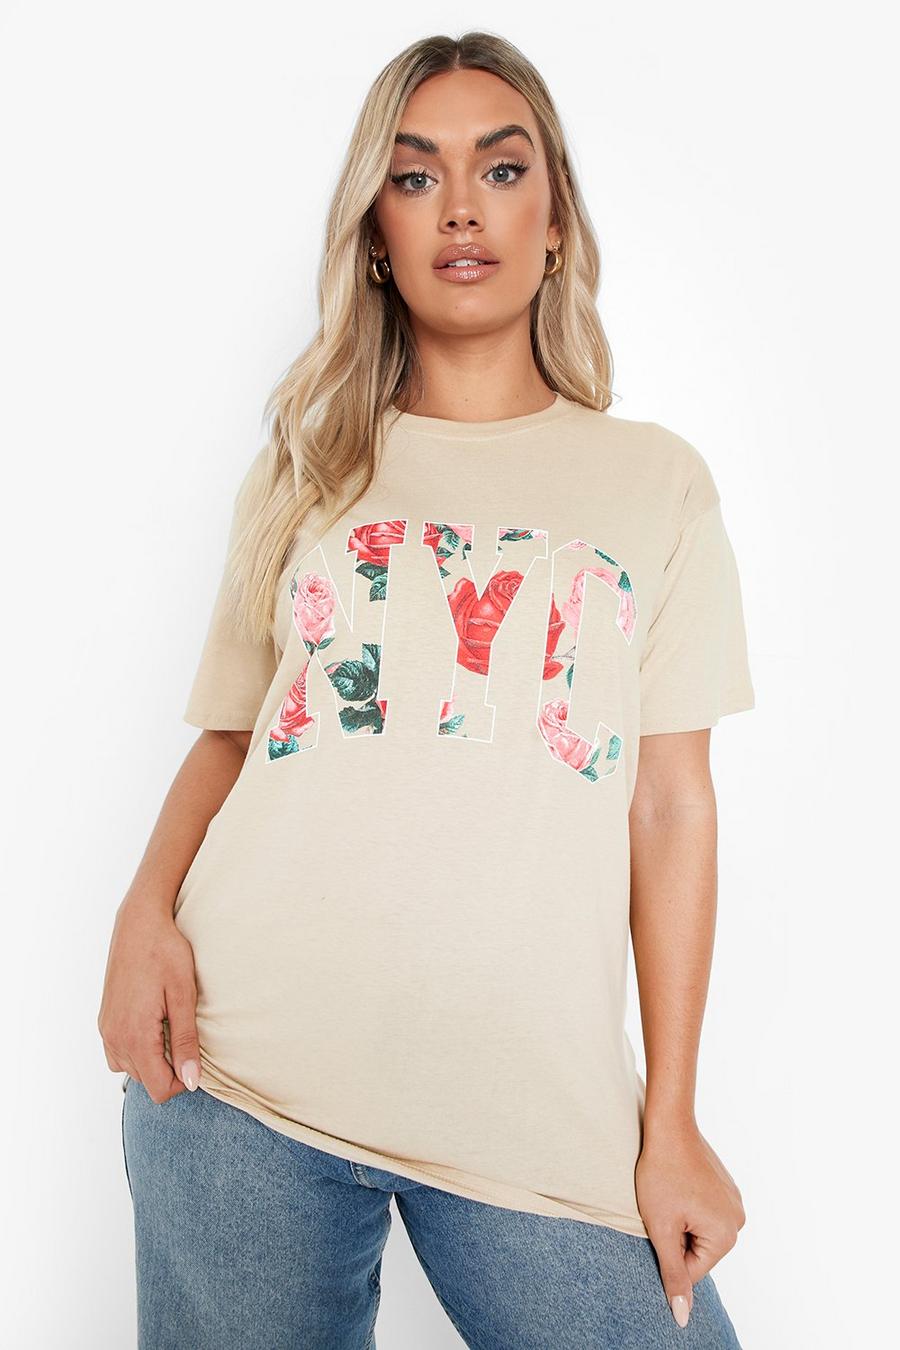 T-shirt Plus Size a fiori NYC, Sand beige image number 1